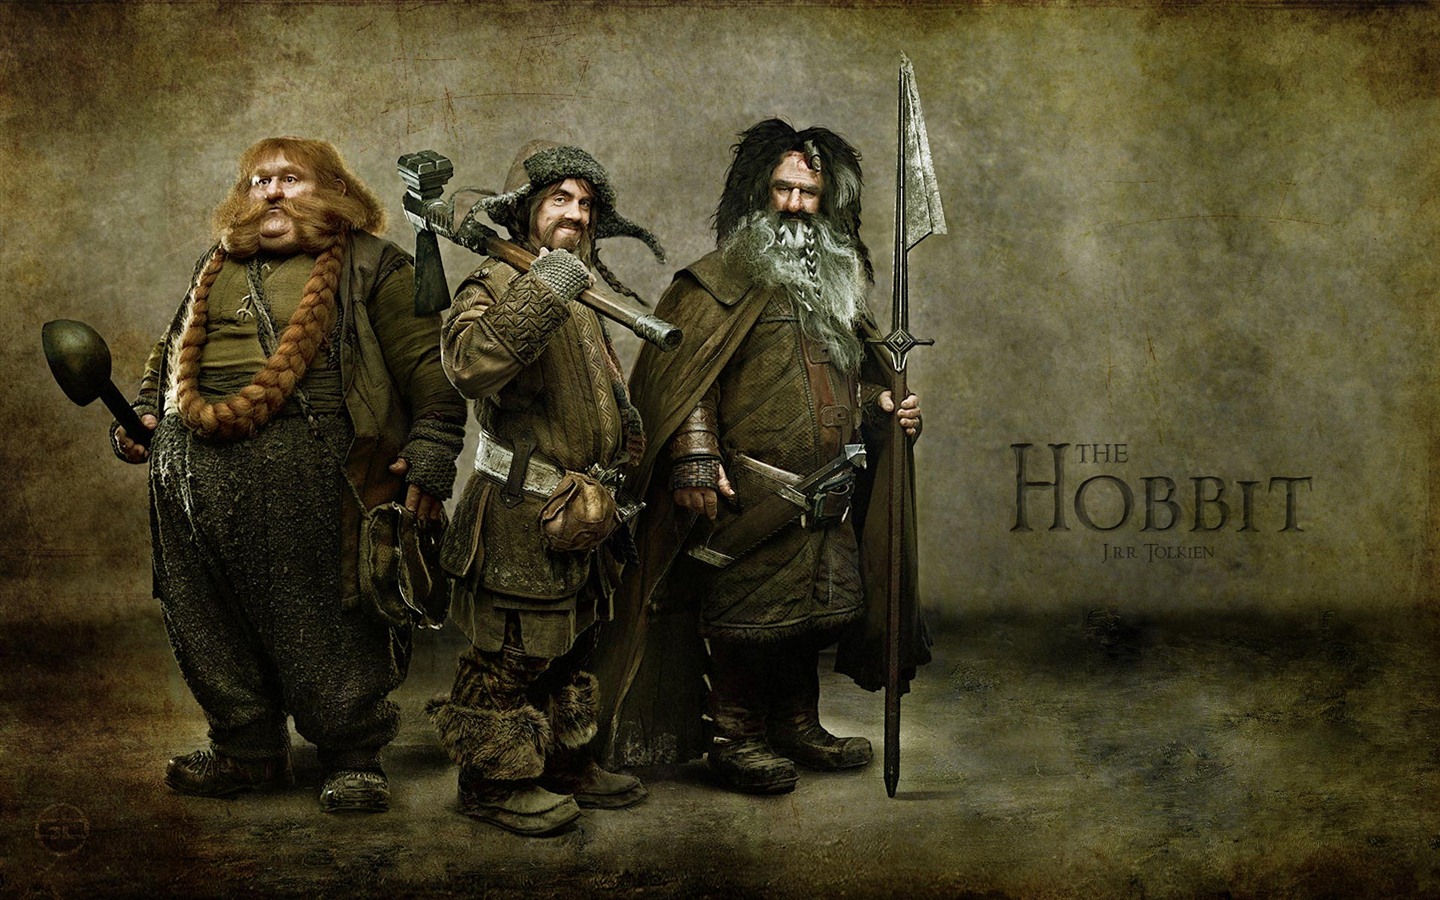 The Hobbit: An Unexpected Journey HD wallpapers #5 - 1440x900